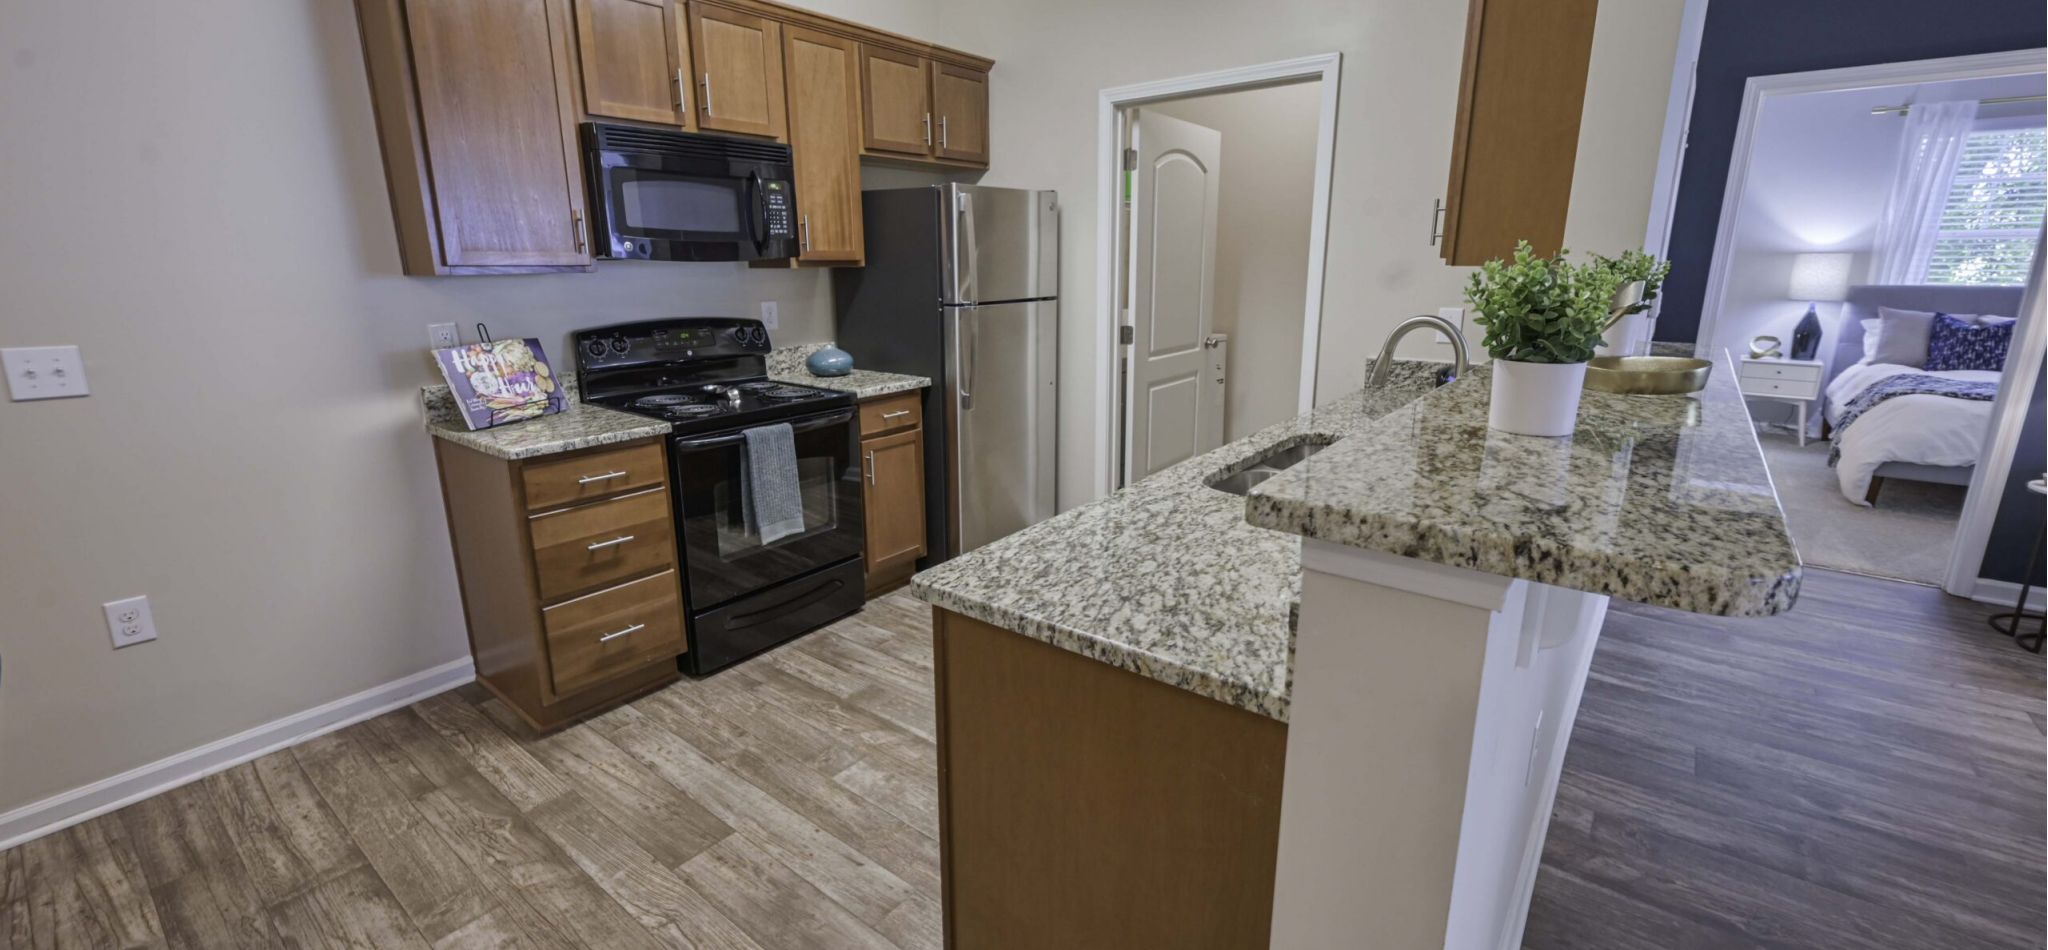 Hawthorne at Murrayville modern kitchen with wooden cabinets, stainless steel appliances, and a granite countertop